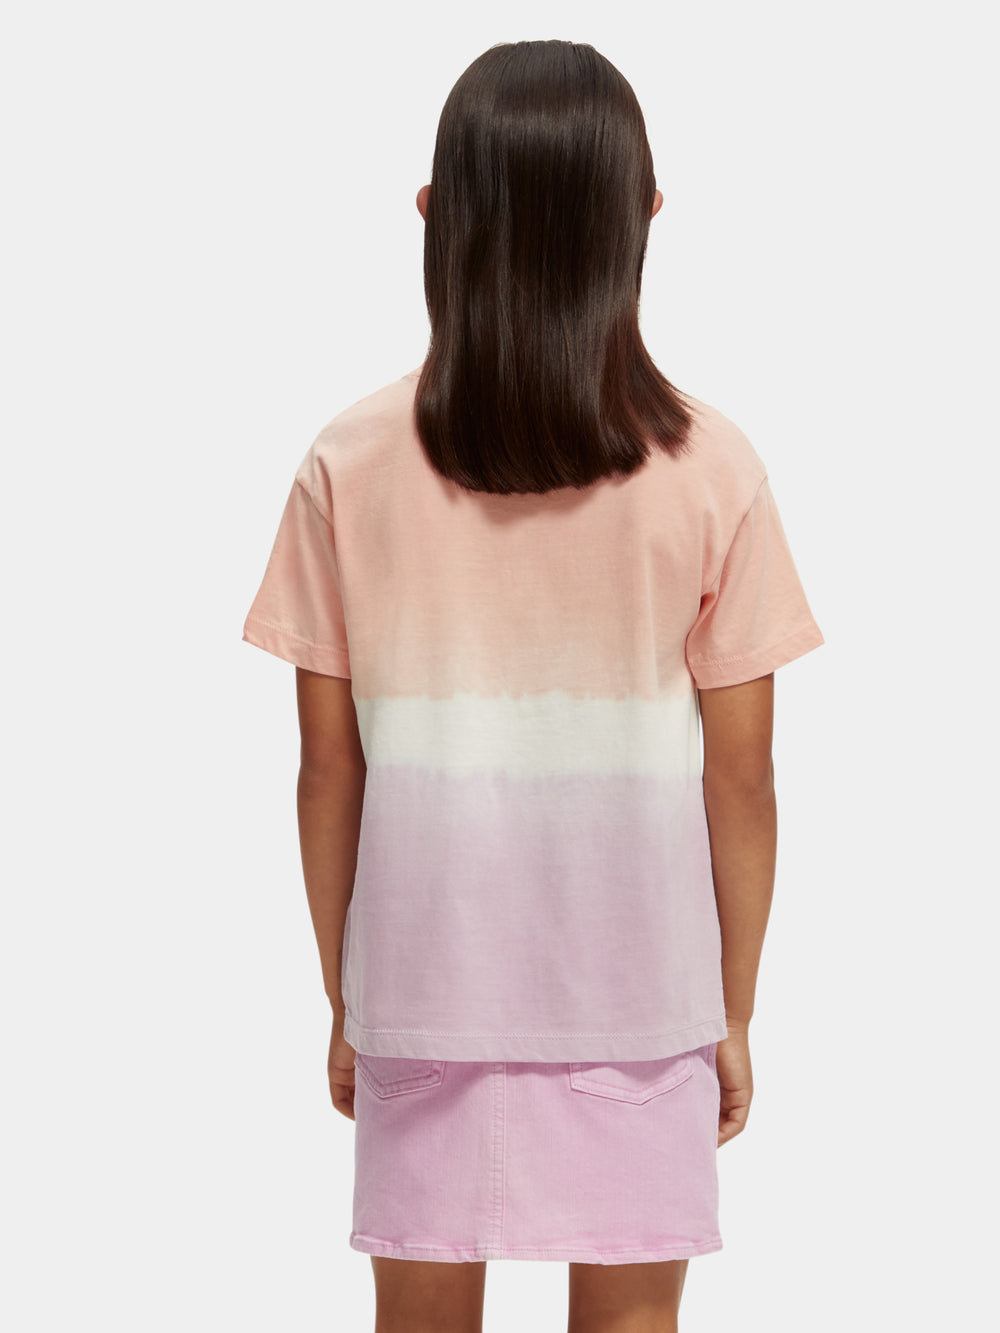 Relaxed fit dip-dyed artwork t-shirt - Scotch & Soda AU